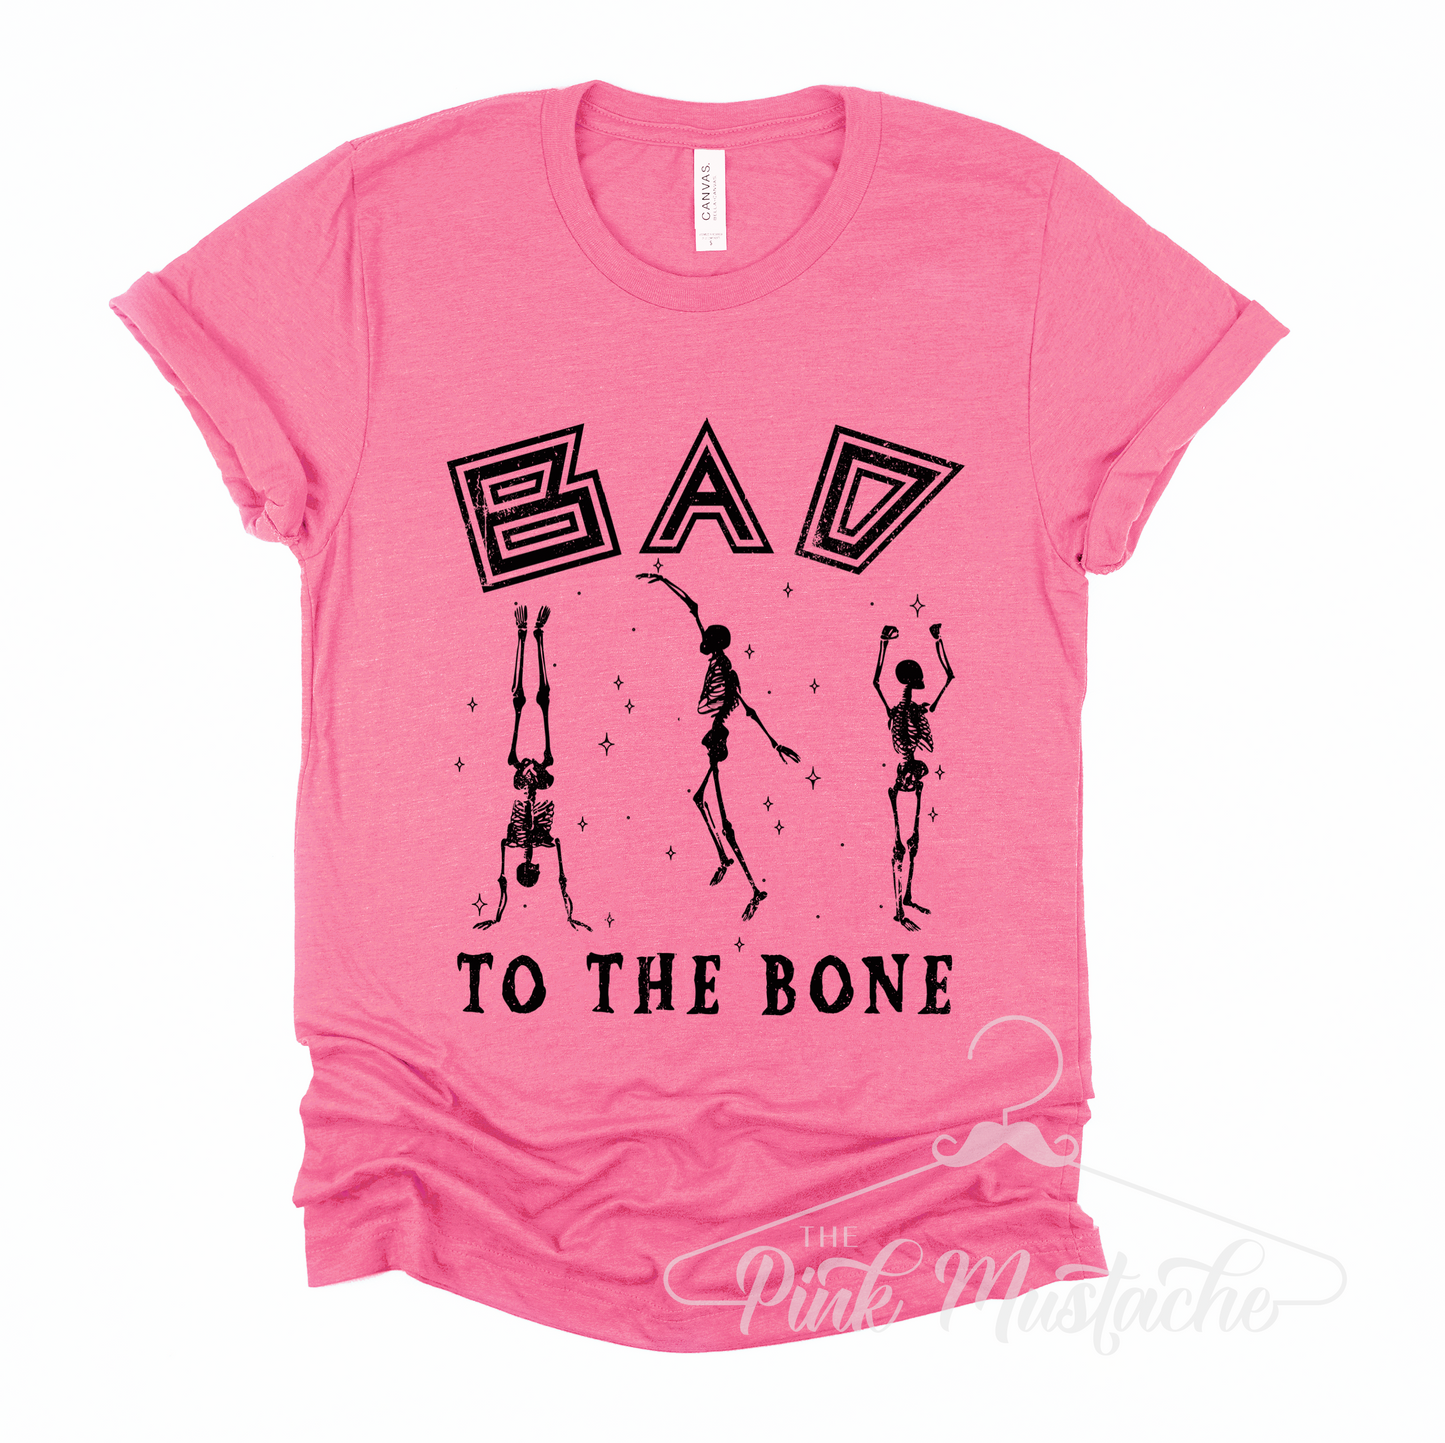 Charity Pink Bad To The Bone Adult Sized Softstyle Tees/ Halloween Style / Fall Style